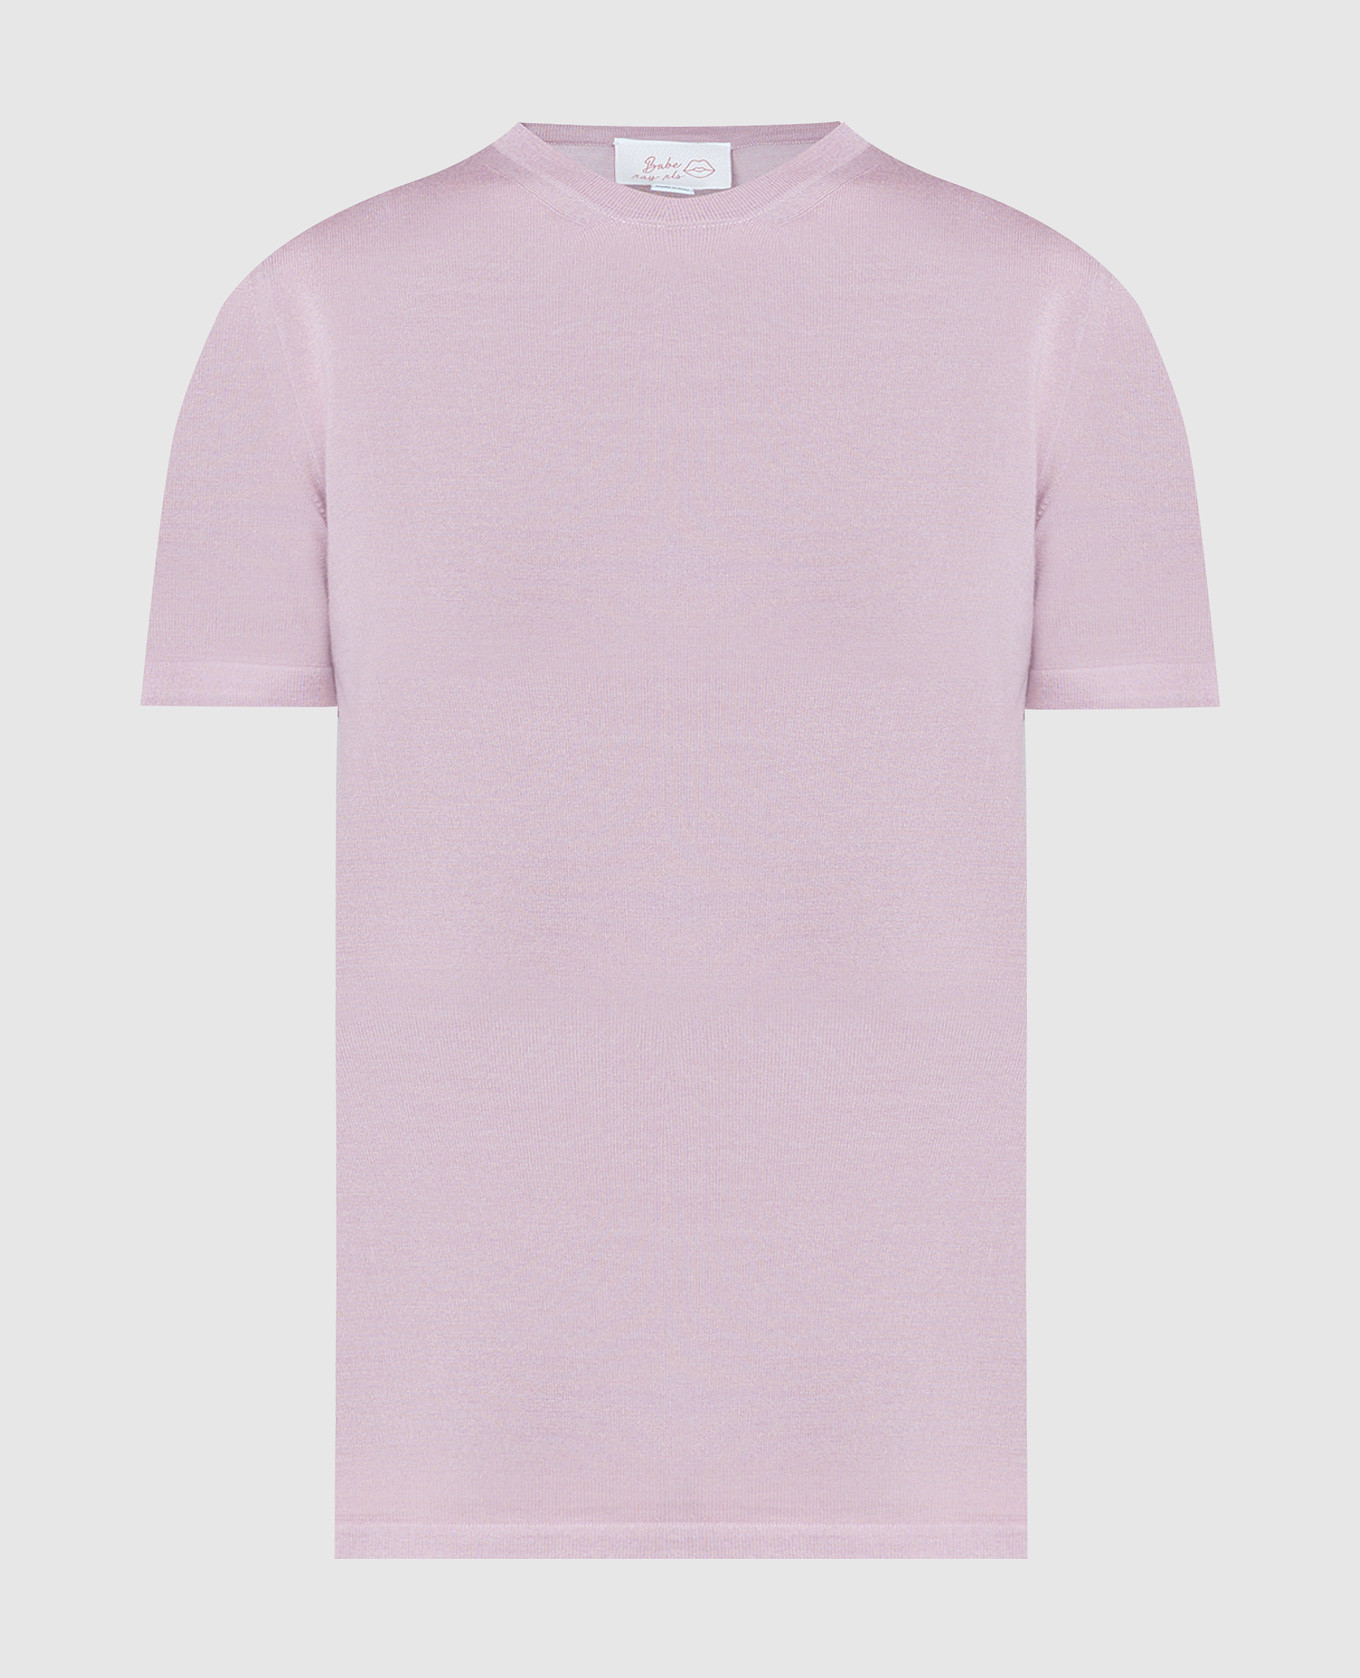 Pink T-shirt made of wool, silk and cashmere